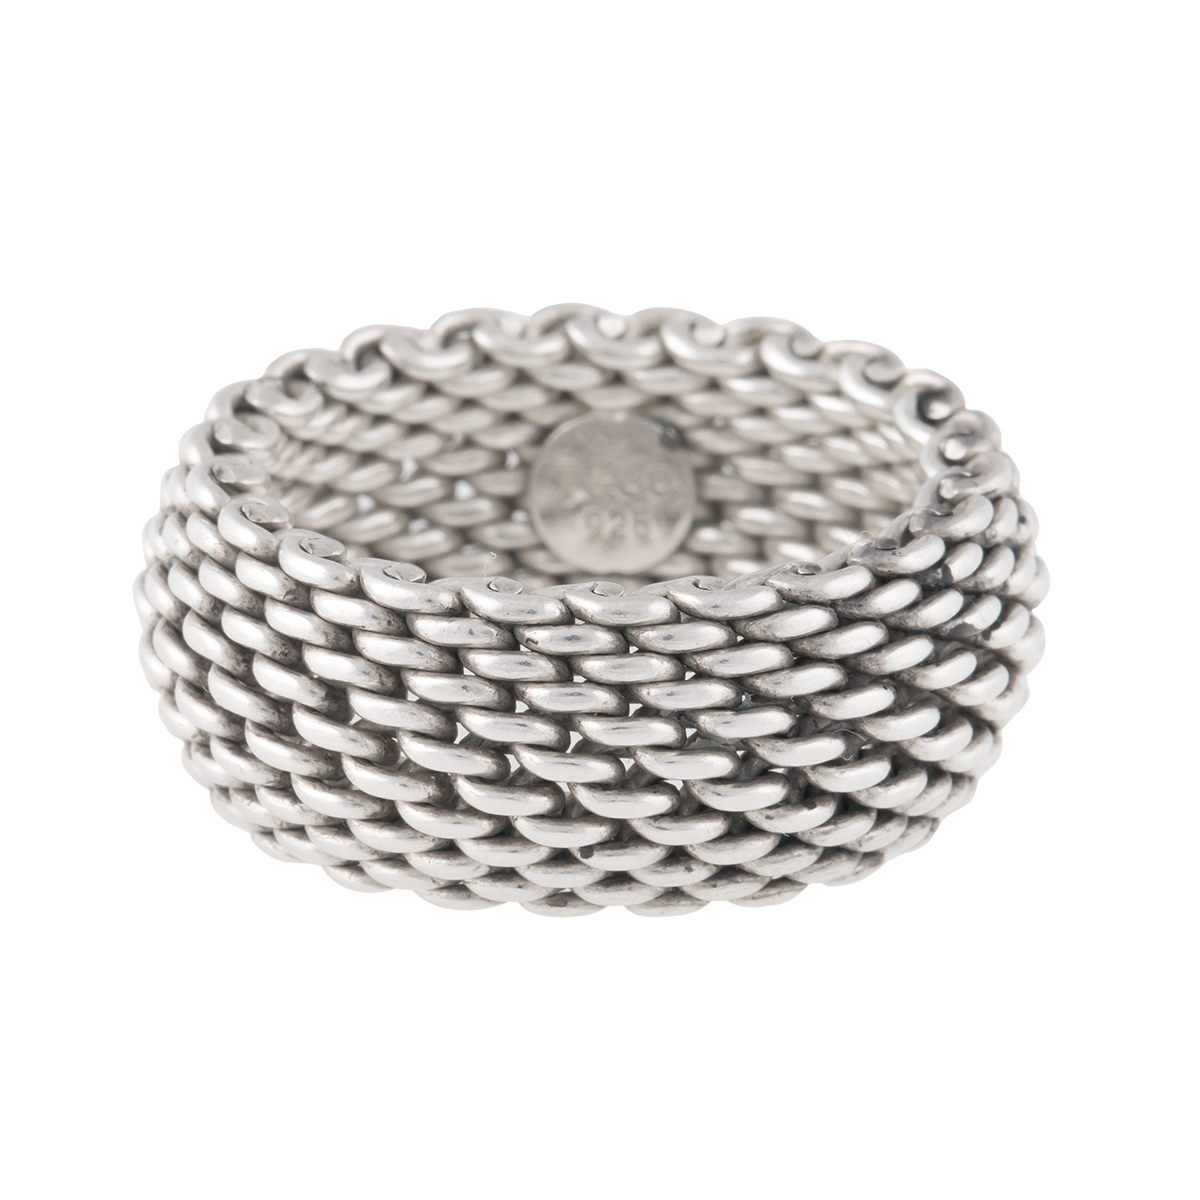 Co. Sterling Silver Mesh Ring Size 